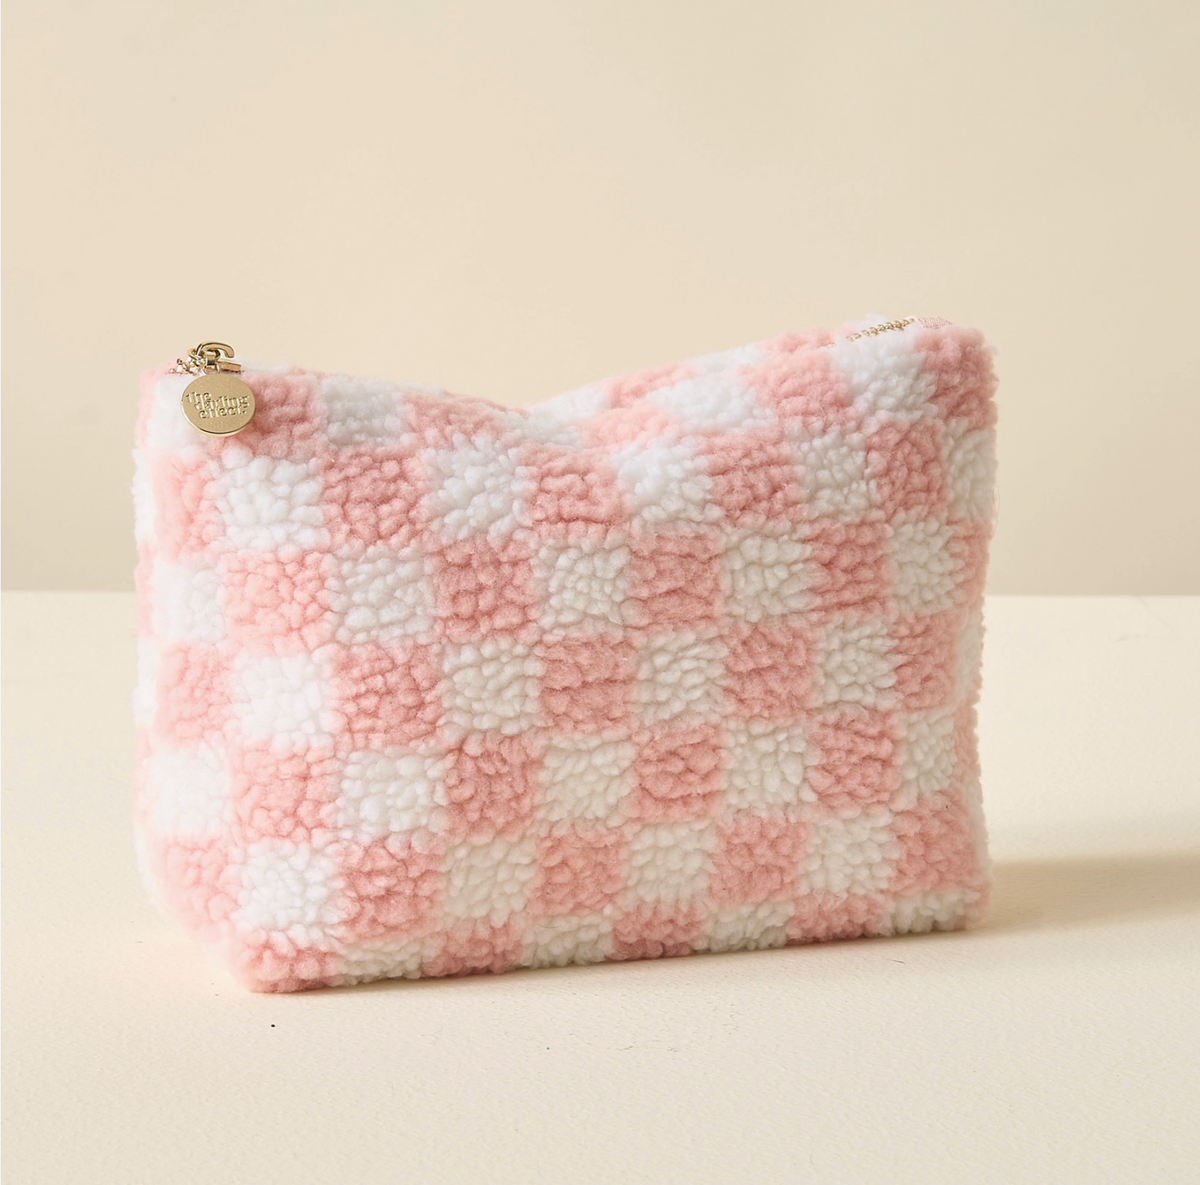 Checkered Pouch - Pink - Large